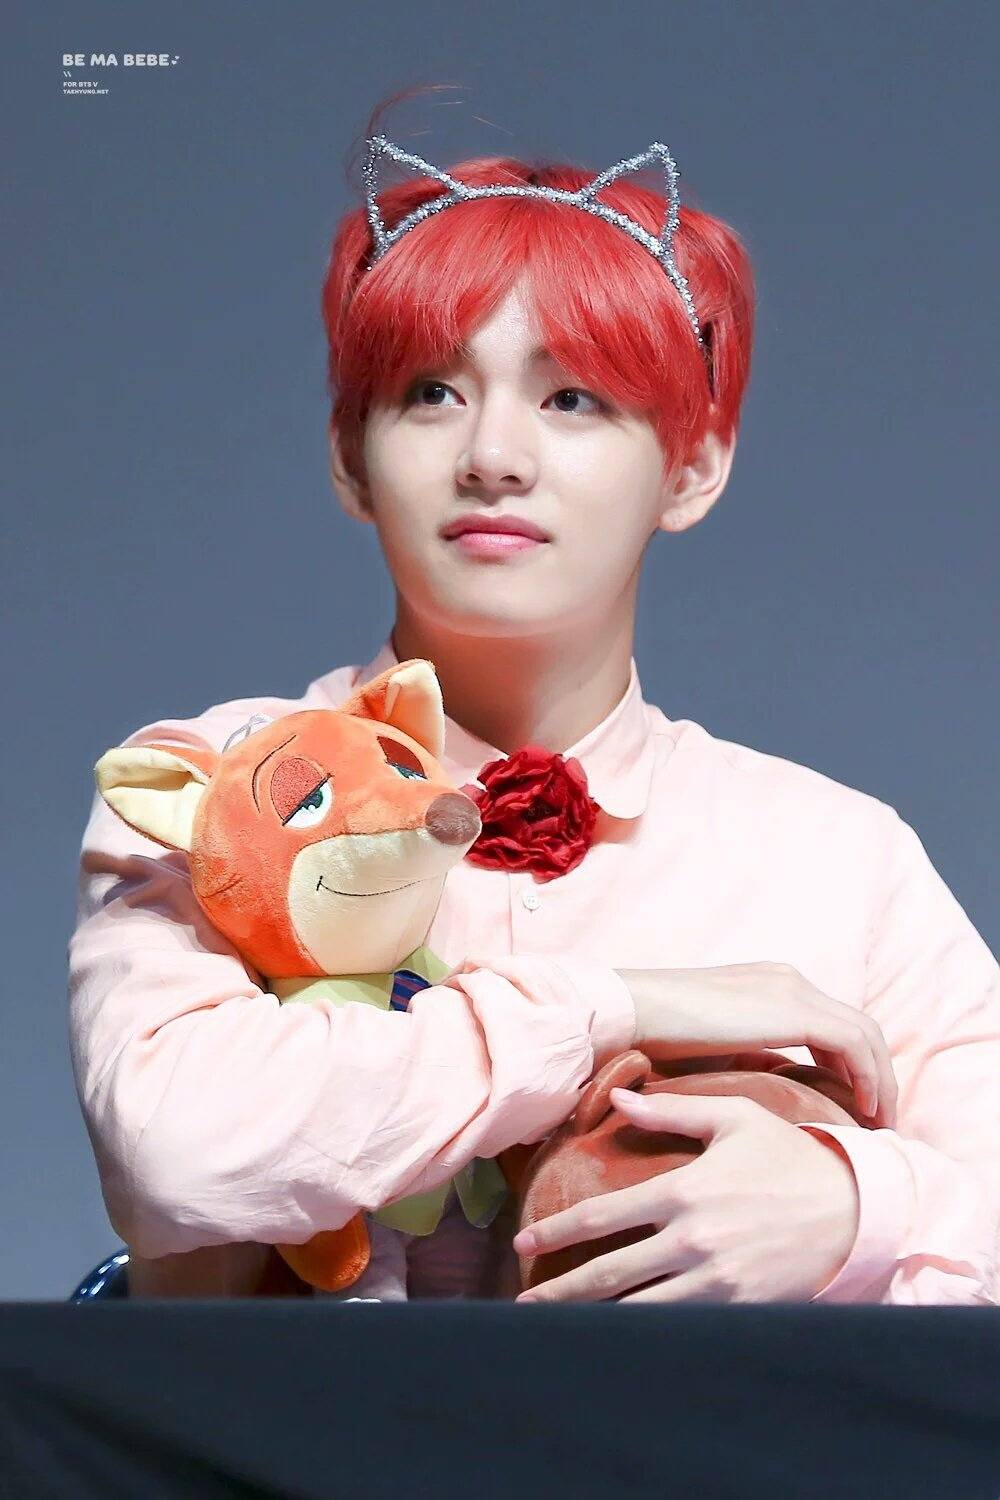 Taehyung holding a soft toy.